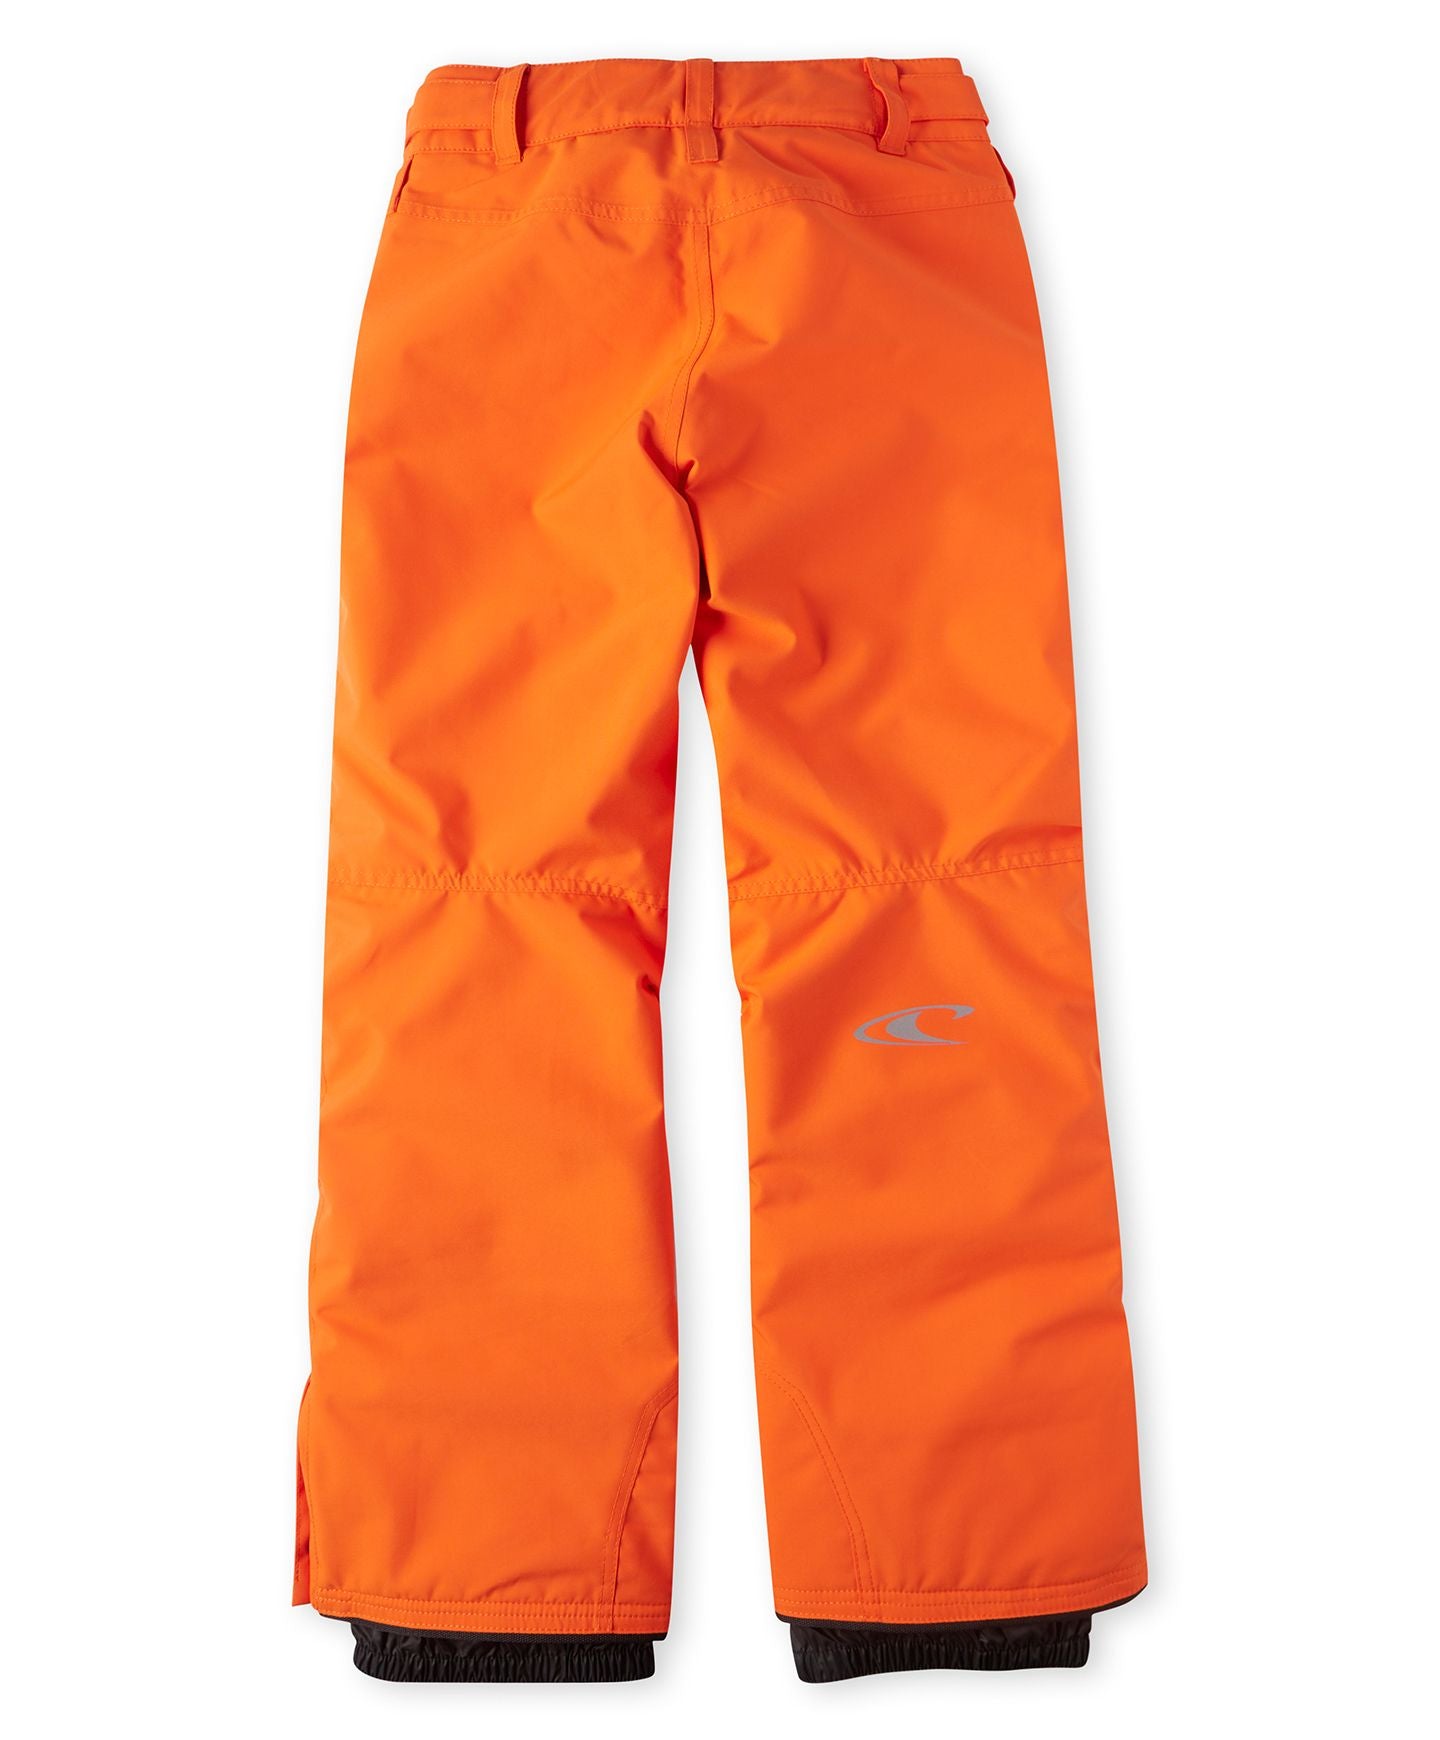 Buy Boys Anvil Snow Pants - PuffinS Bill by ONeill online